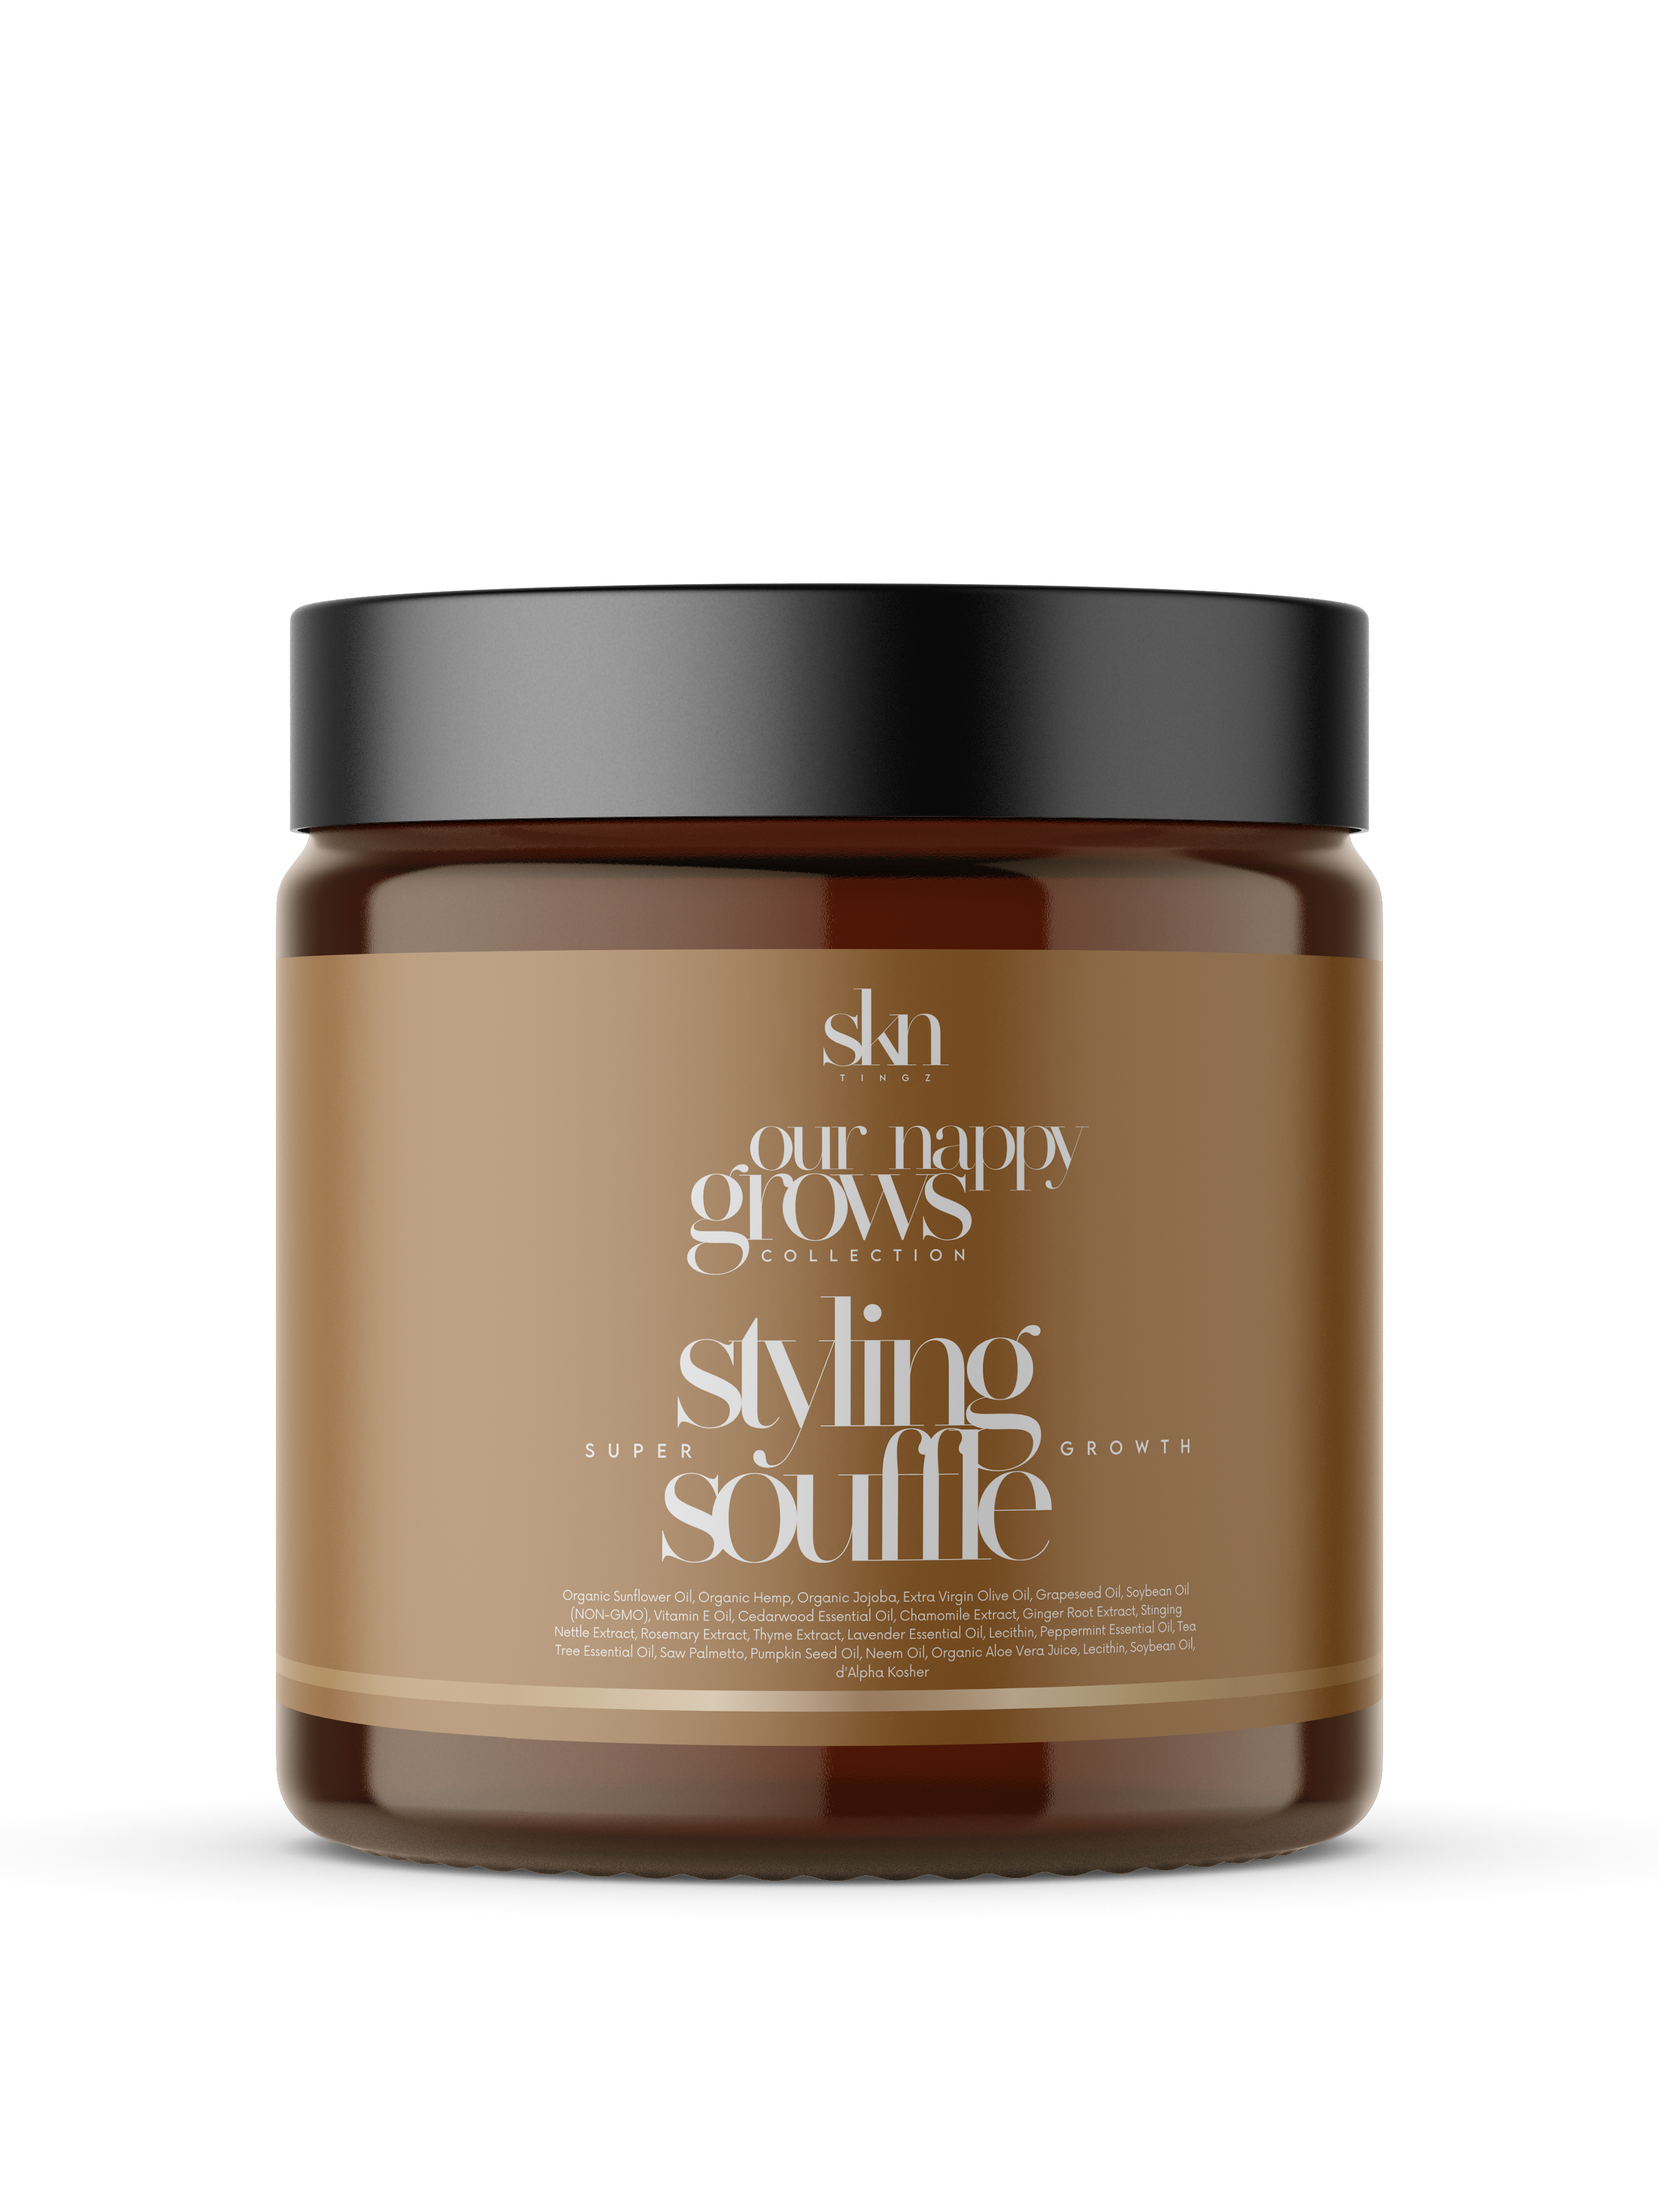 Our Nappy Grows Hair Styling Soufflé